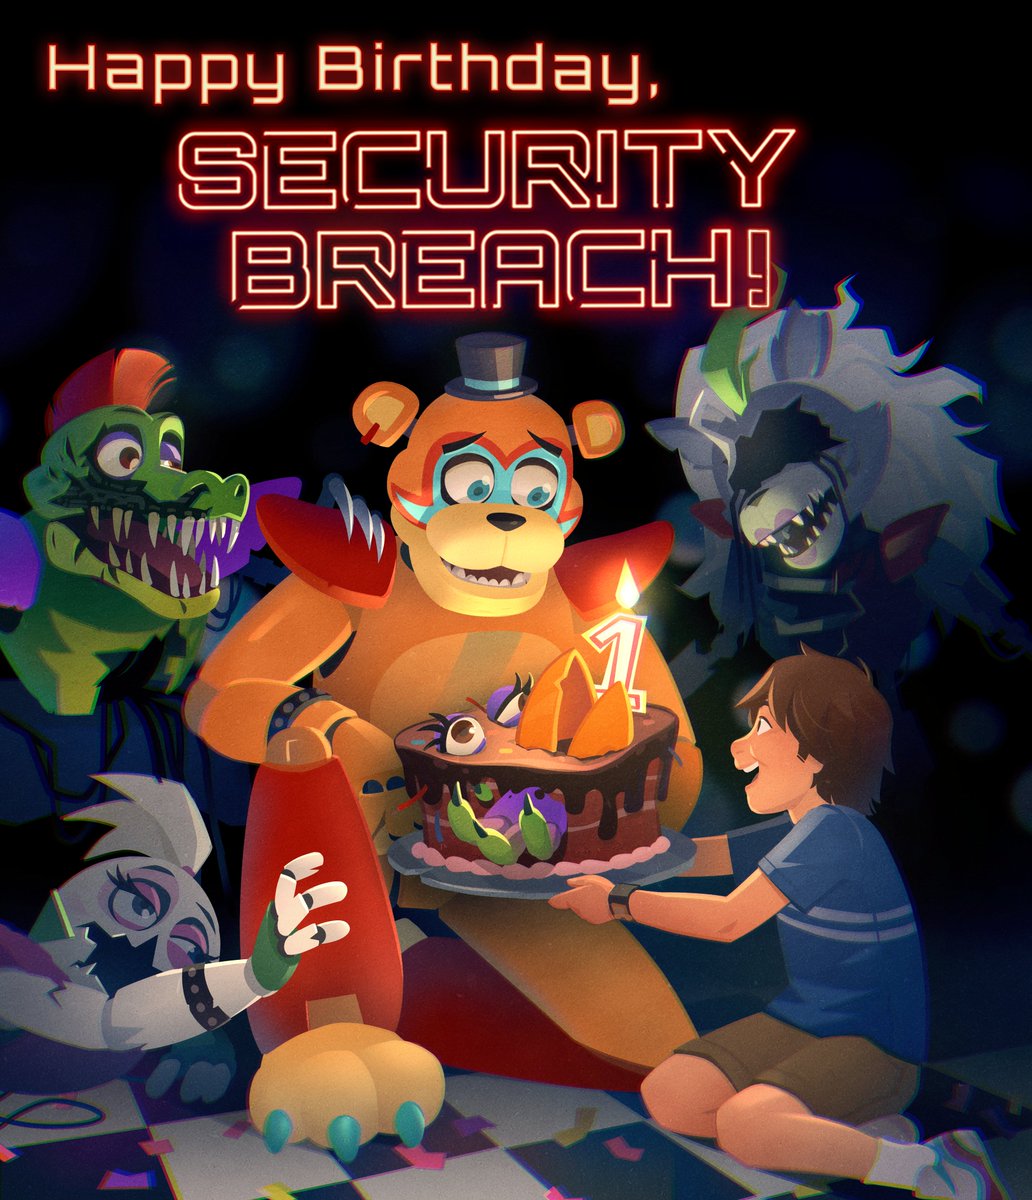 🎂It’s the one-year anniversary of Five Nights at Freddy’s: Security Breach! To thank all of you Superstars, we’re releasing the Original Soundtrack! Let’s Party!!🎵
open.spotify.com/album/5ZGHCnge…